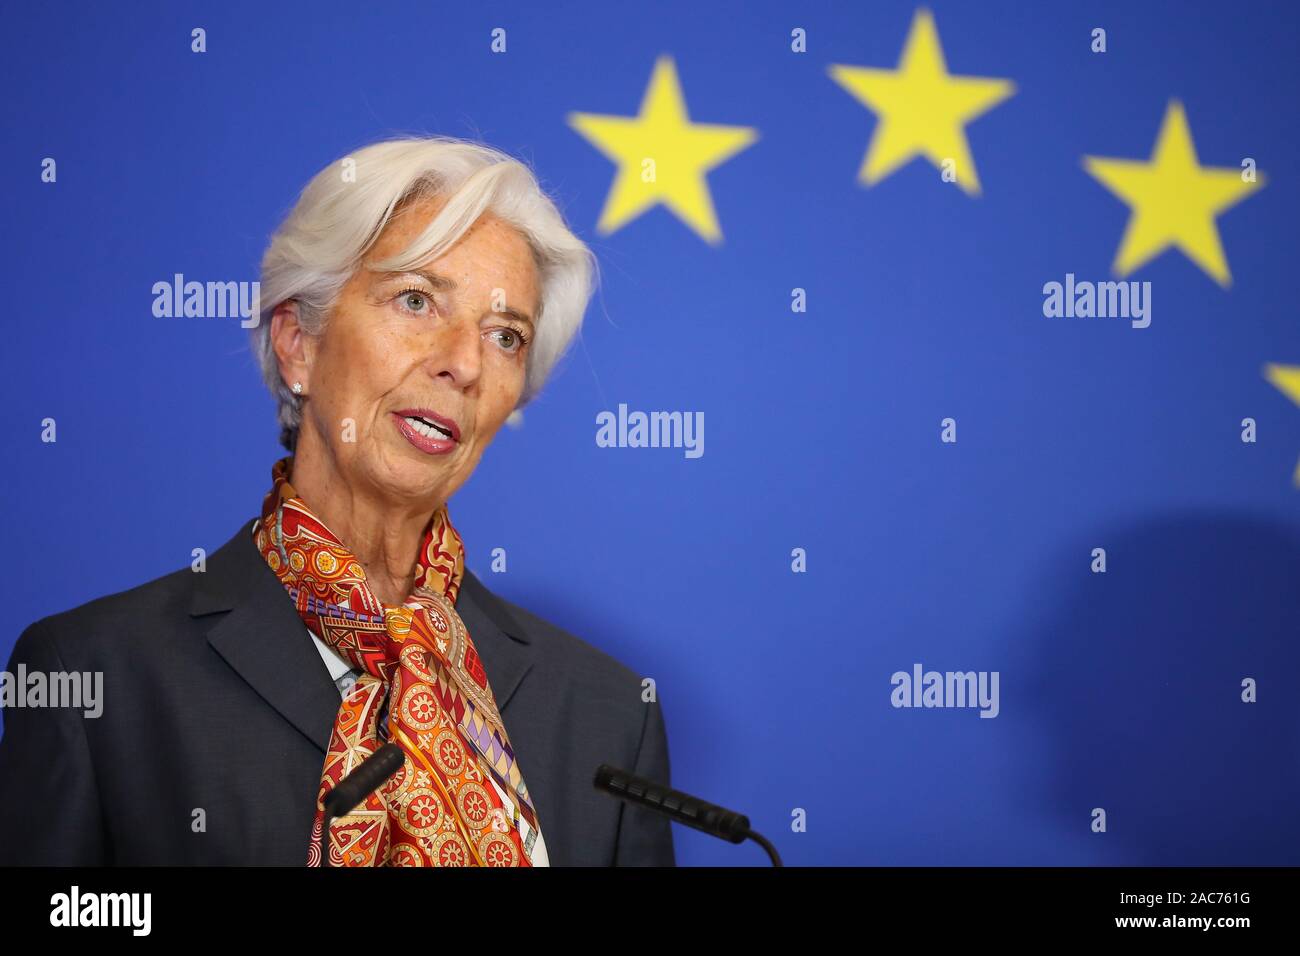 (191201) -- BRUSSELS, Dec. 1, 2019 (Xinhua) -- European Central Bank President Christine Lagarde delivers a speech during a ceremony to mark the 10th anniversary of the entry into force of the Lisbon Treaty, at the House of European History in Brussels, Belgium, Dec. 1, 2019. (Xinhua/Zhang Cheng) Stock Photo